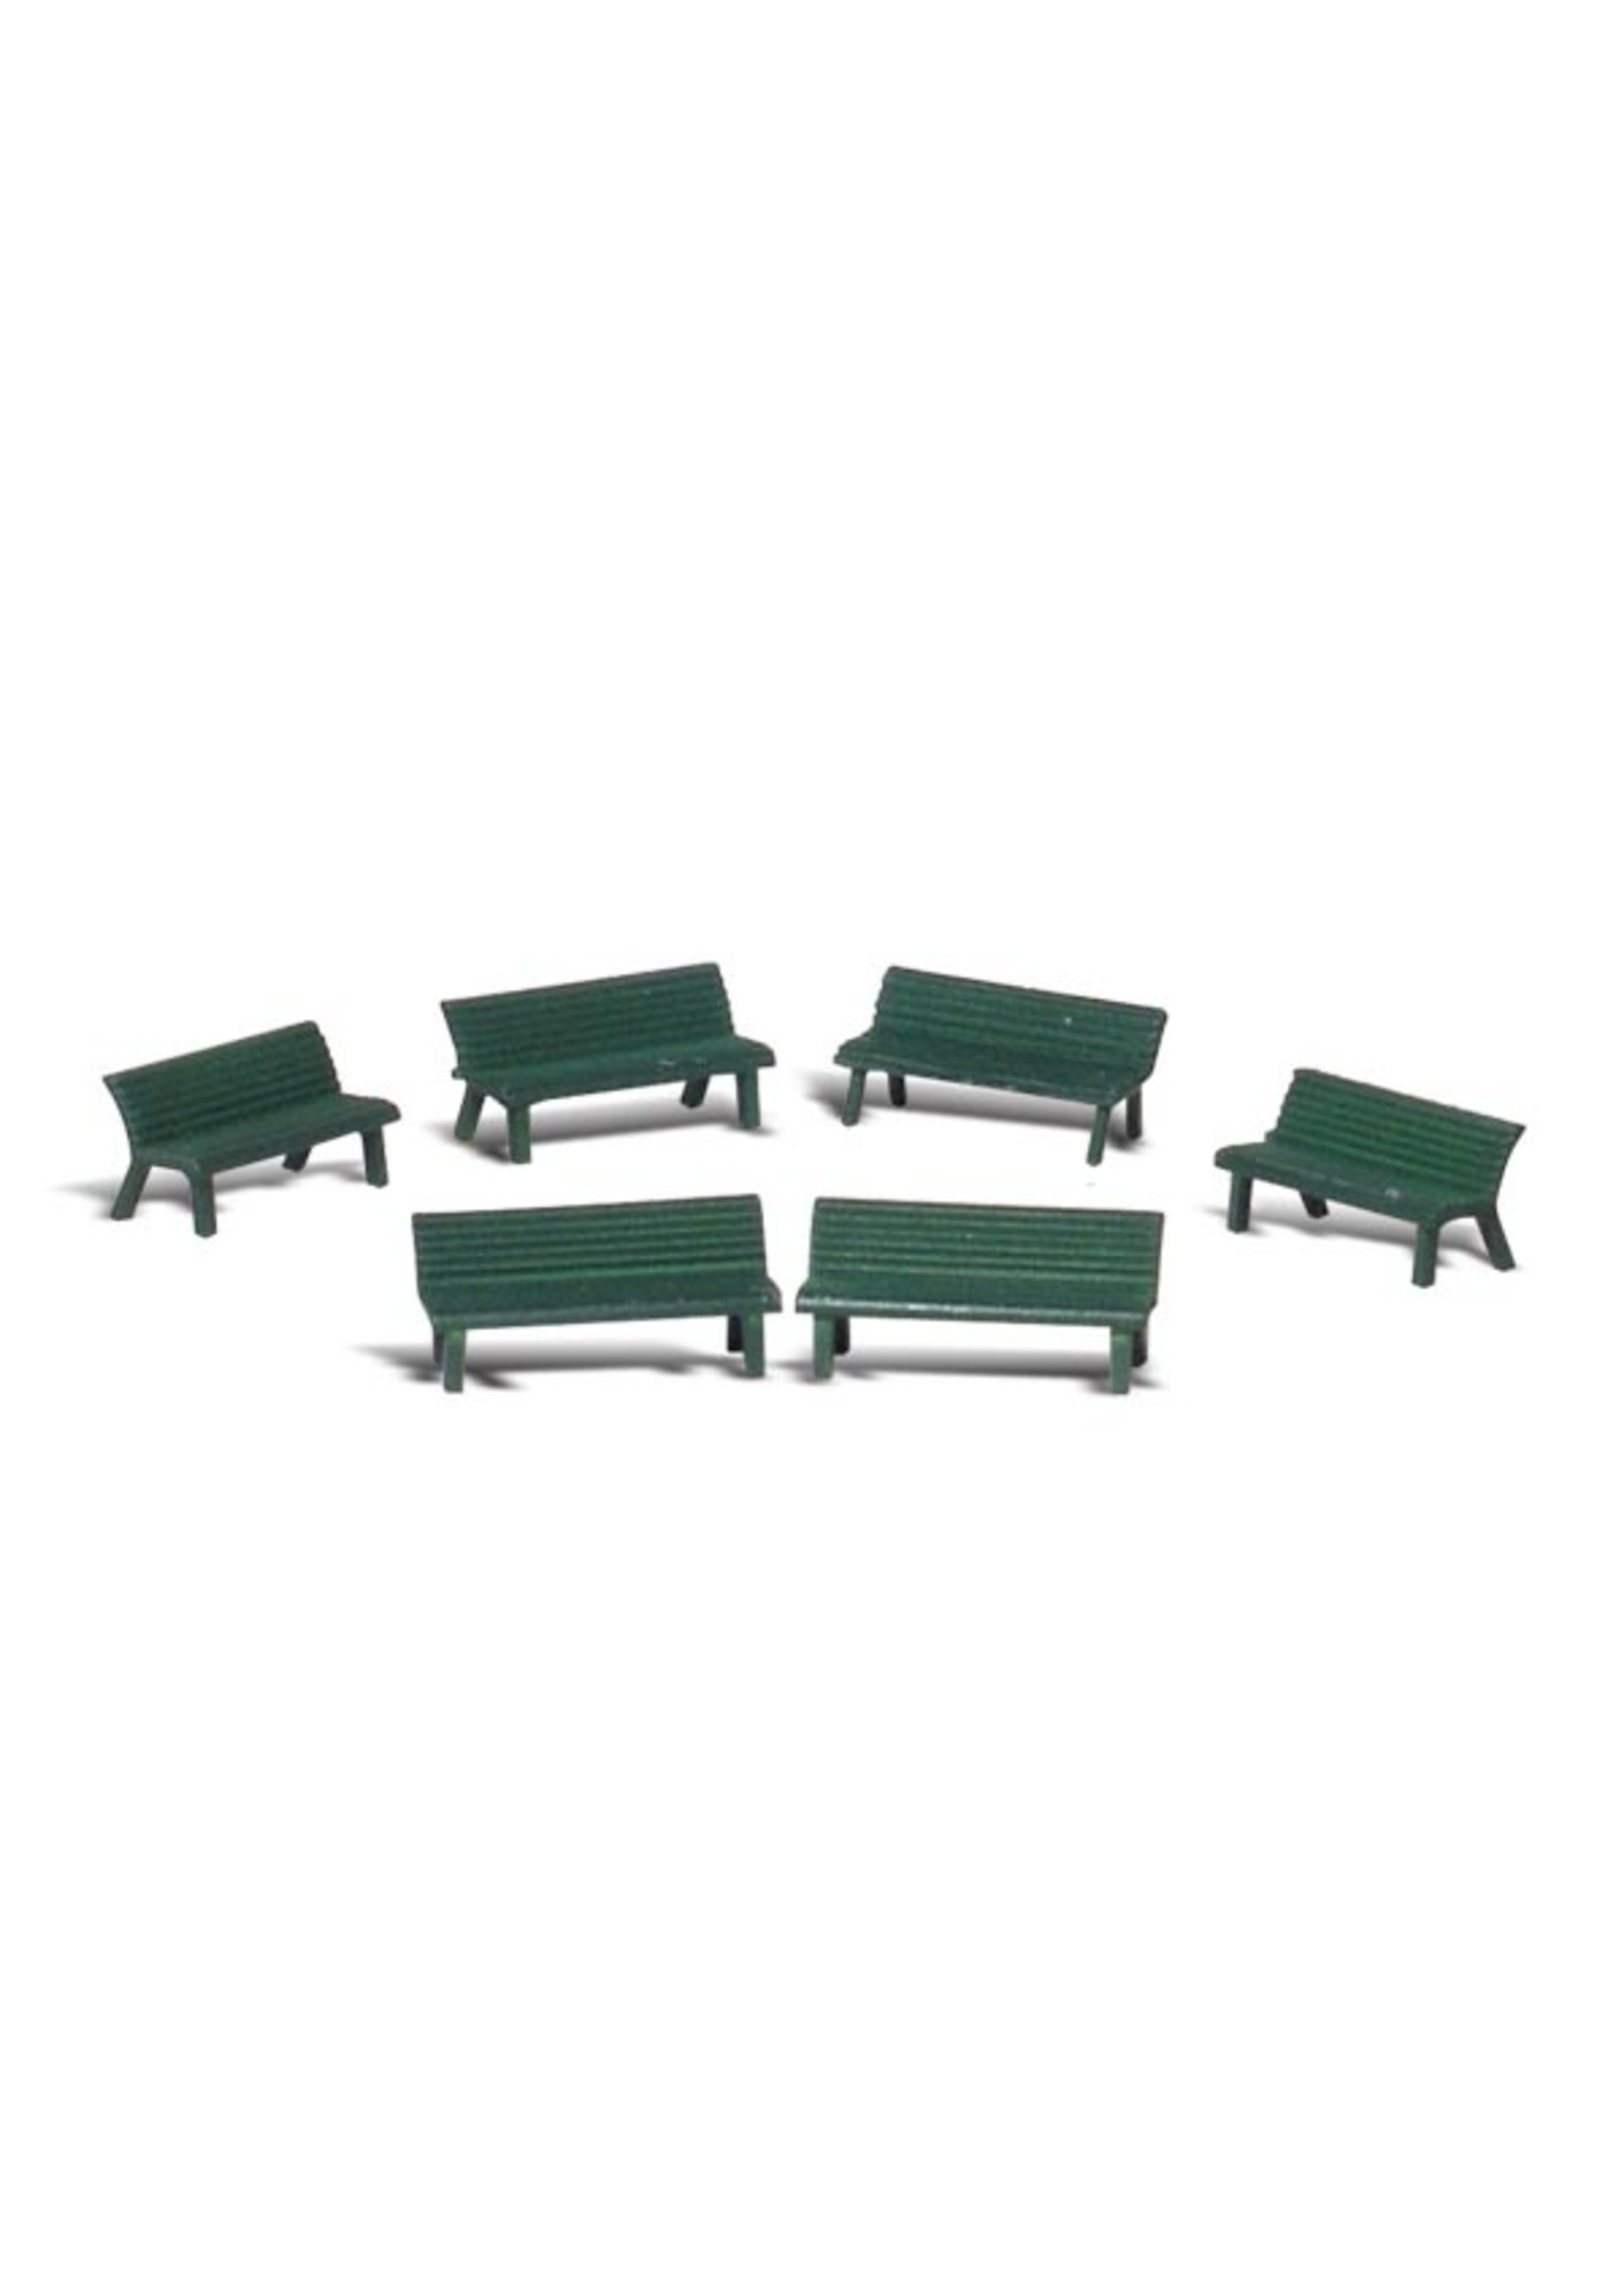 Woodland Scenics A2181 - N Scale Park Benches